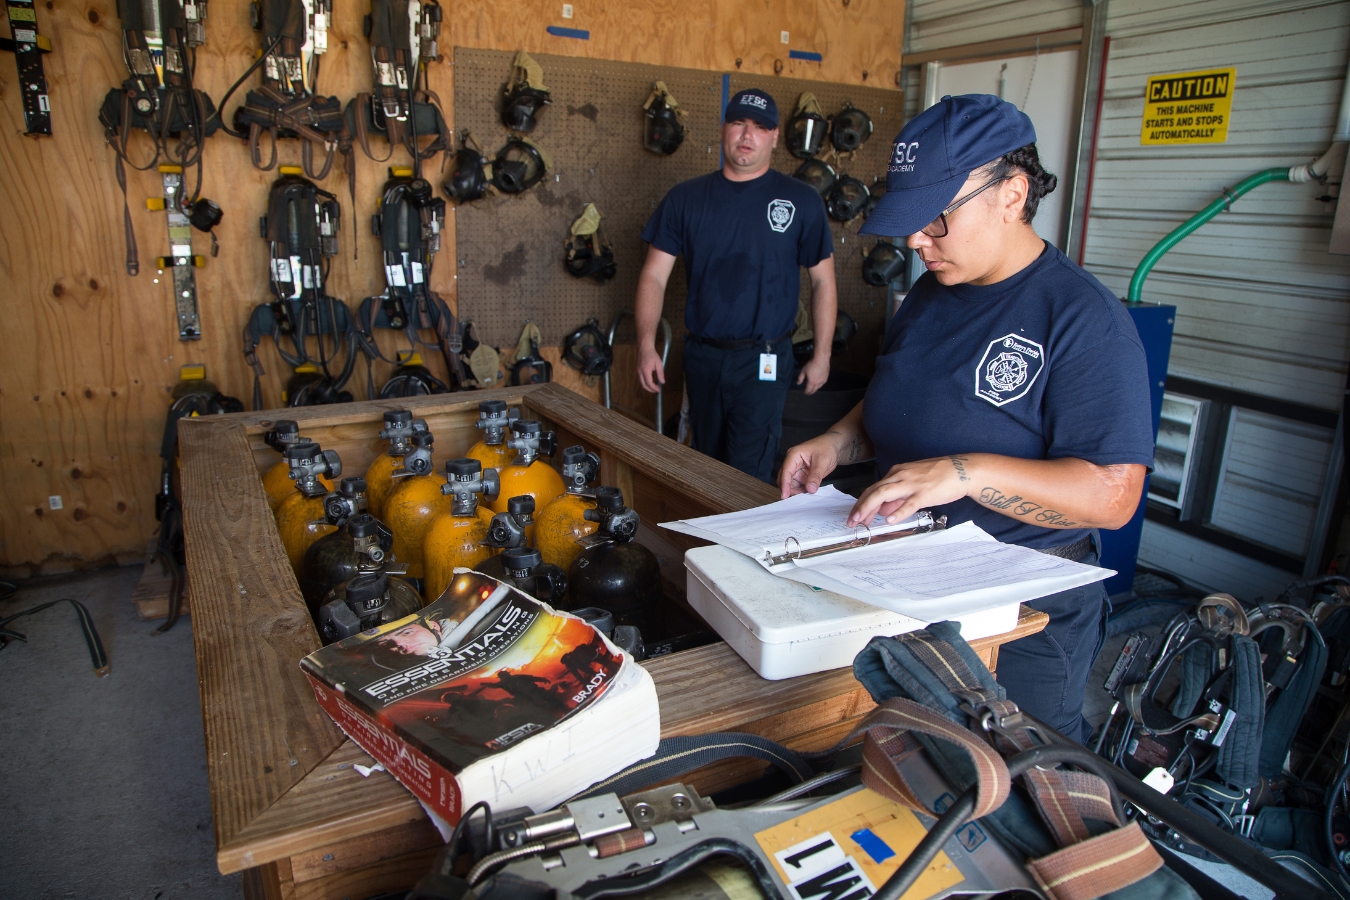 Two fire fighter students review their book materials as they work in a room with firefighting gear